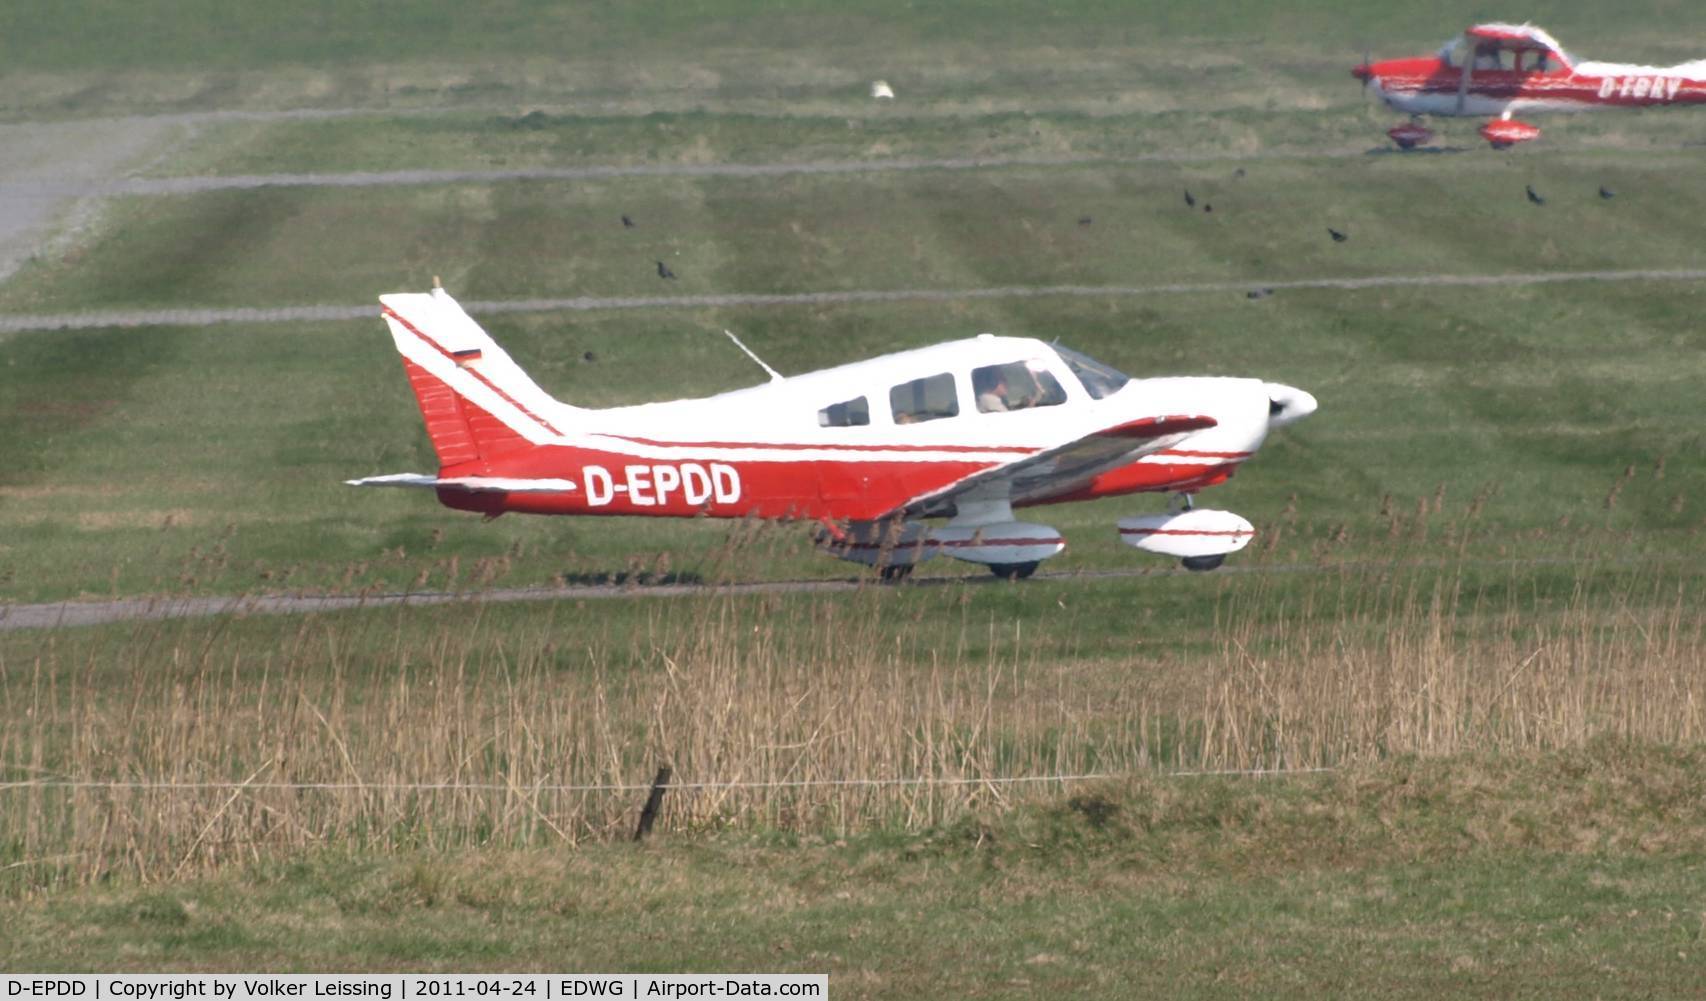 D-EPDD, 2008 Piper PA-28-181 Archer II C/N 28-7890528, taxiing